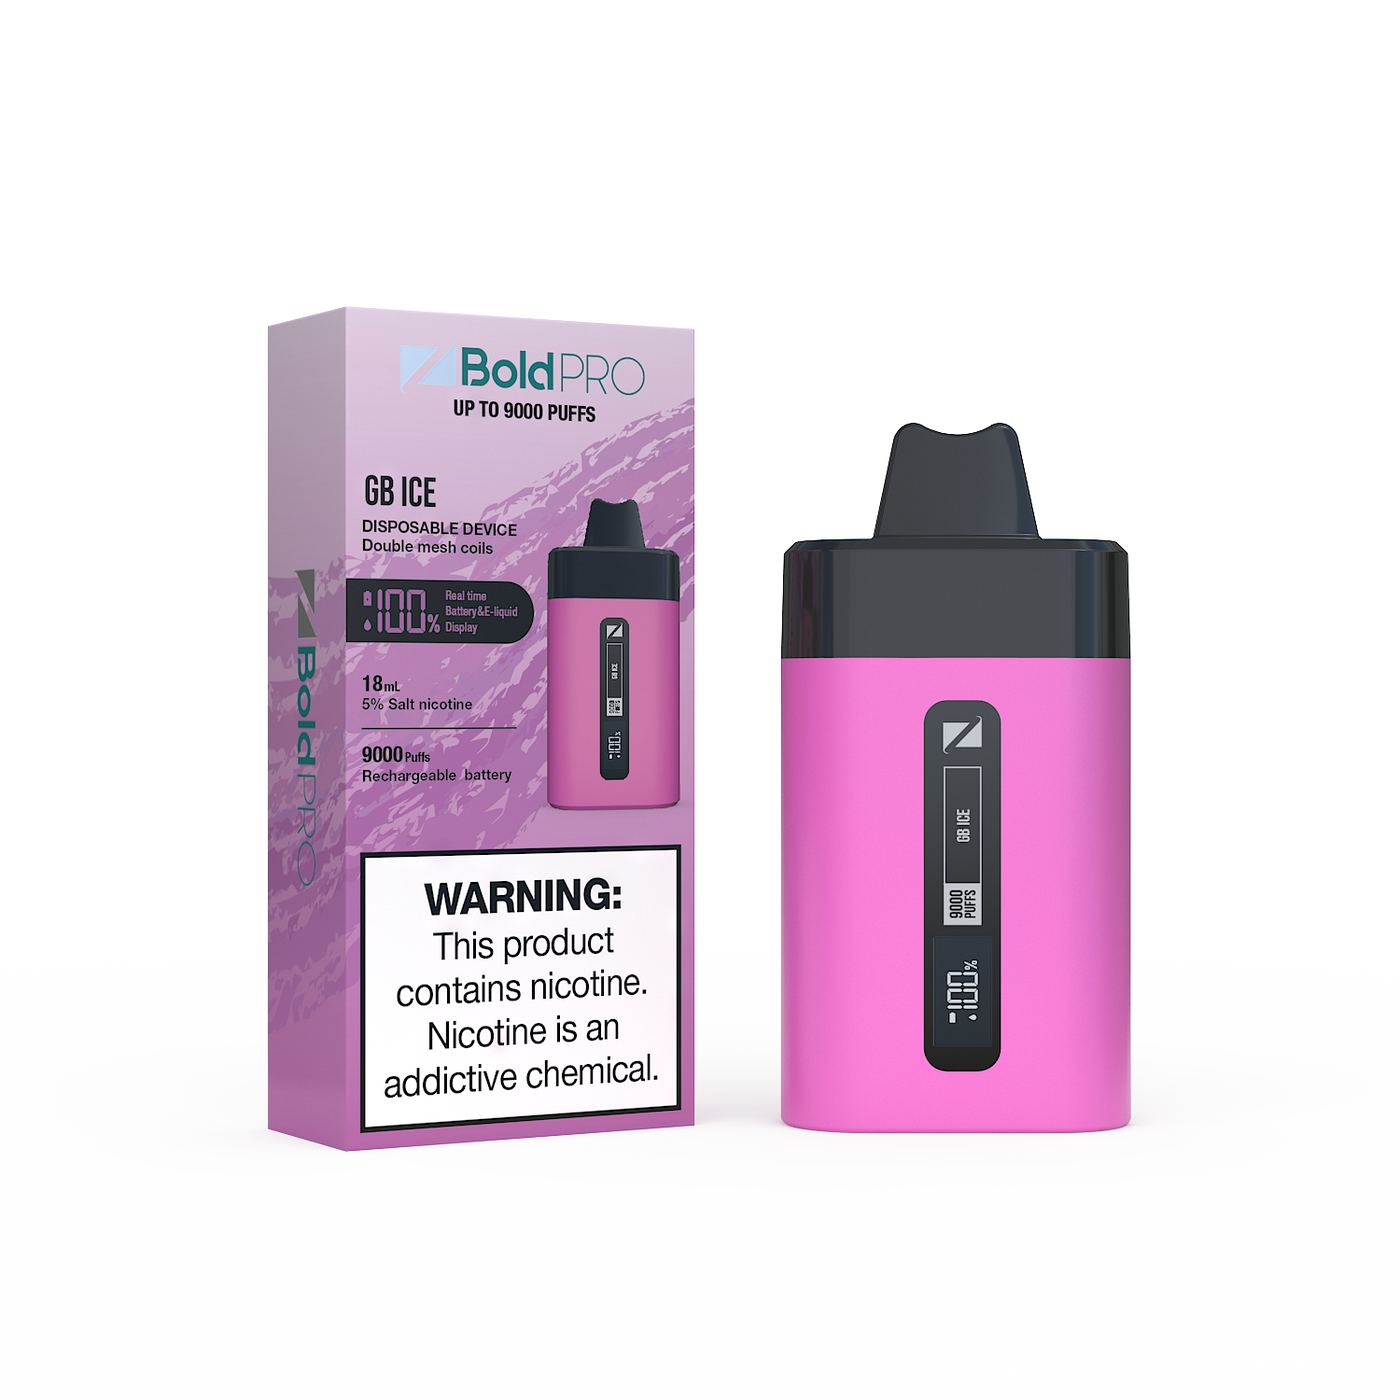 Z Bold Pro - Gummy Bear Ice - 9000 Puffs - LED Screen with Juice and Battery Indicator